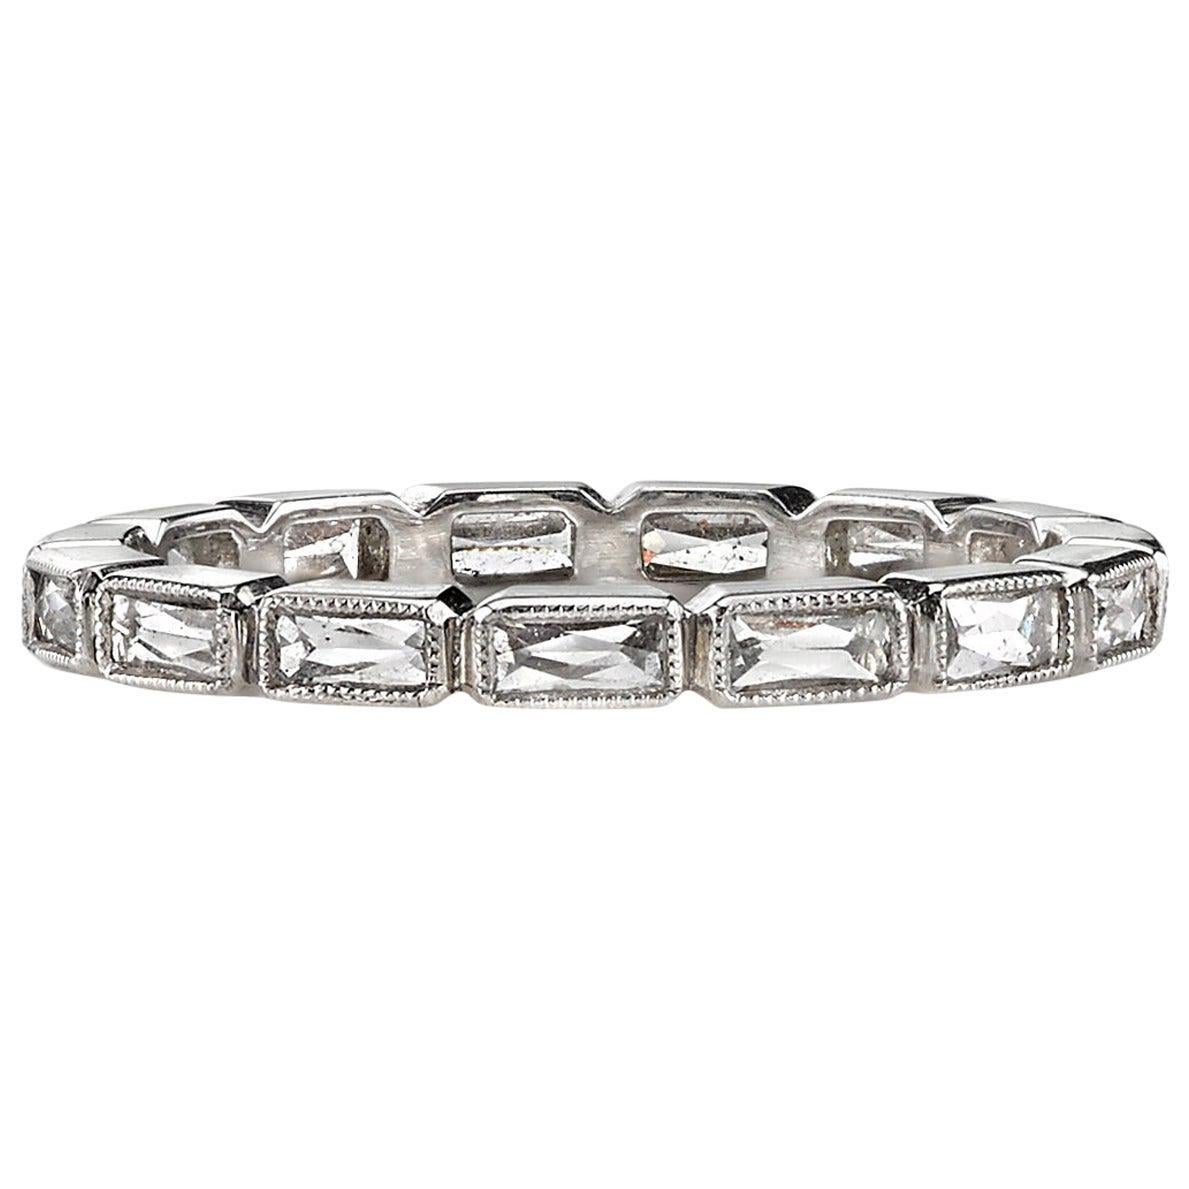 For Sale:  Handcrafted Julia French Cut Diamond Platinum Eternity Band by Single Stone